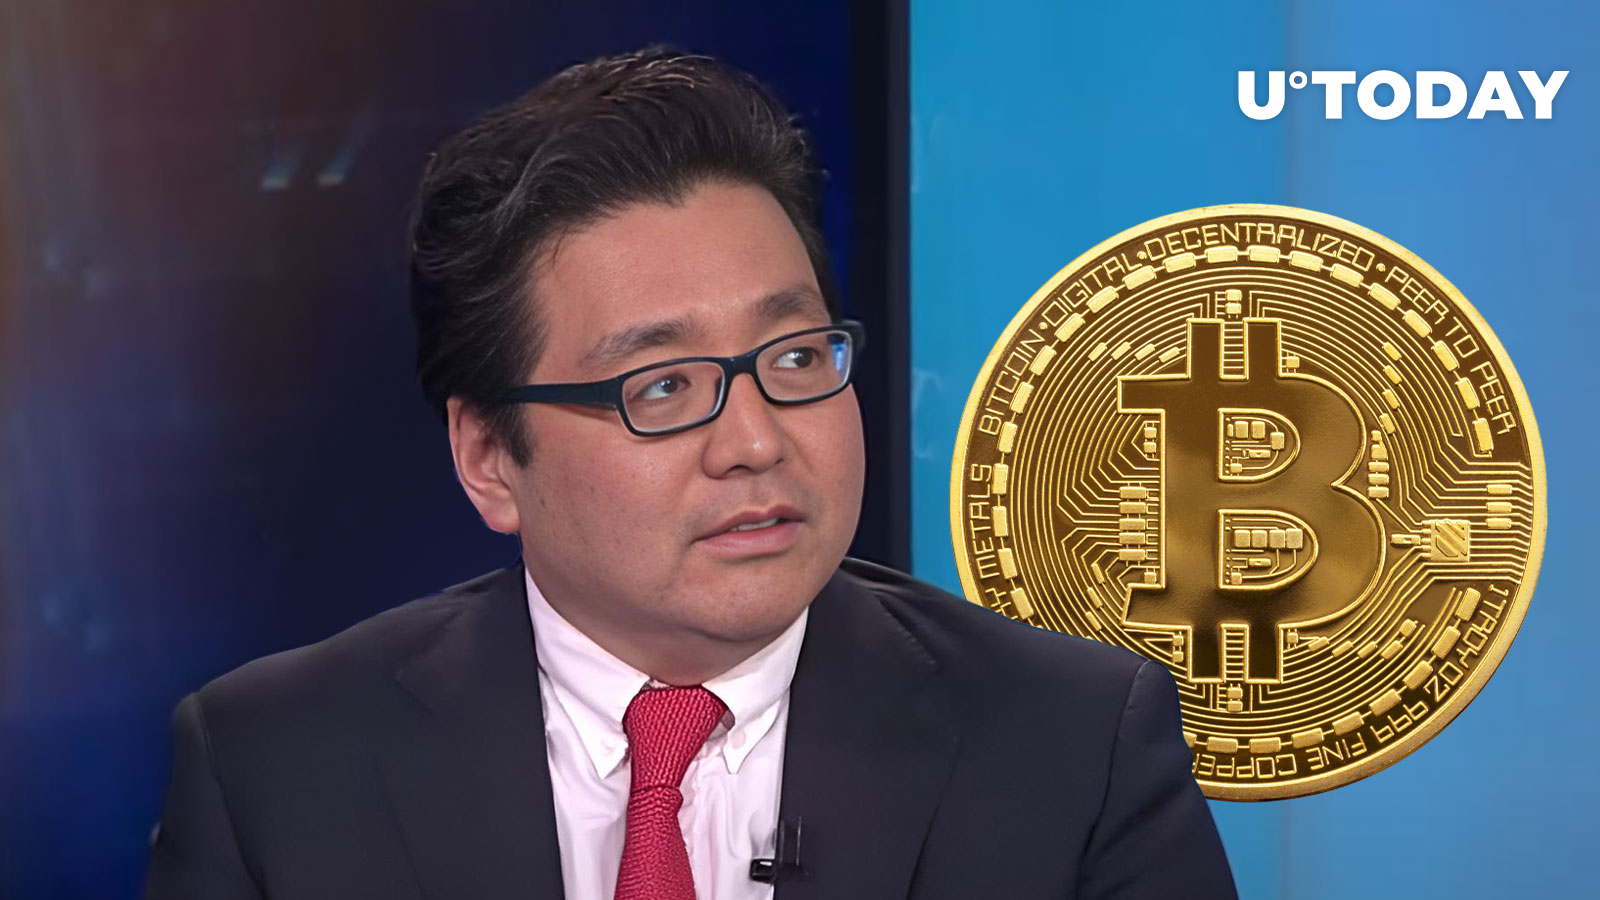 Fundstrat's Tom Lee Predicts Bitcoin Price Will Surge to $150,000